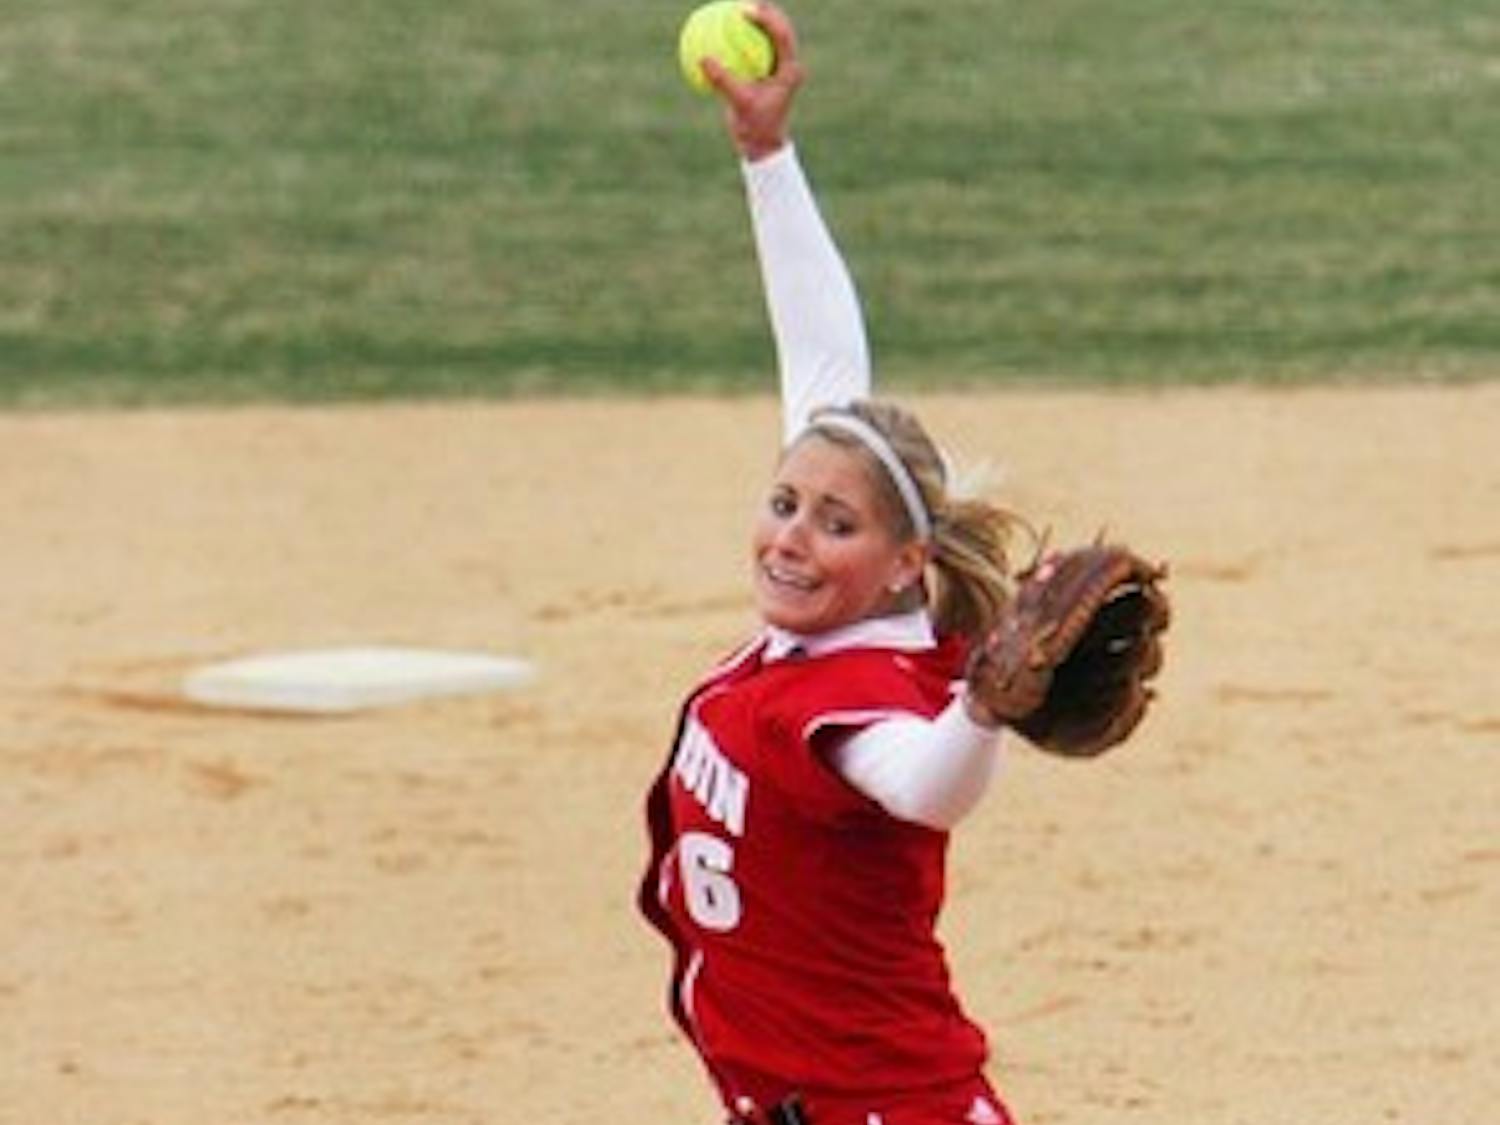 Softball looks to recover after heartbreaking loss